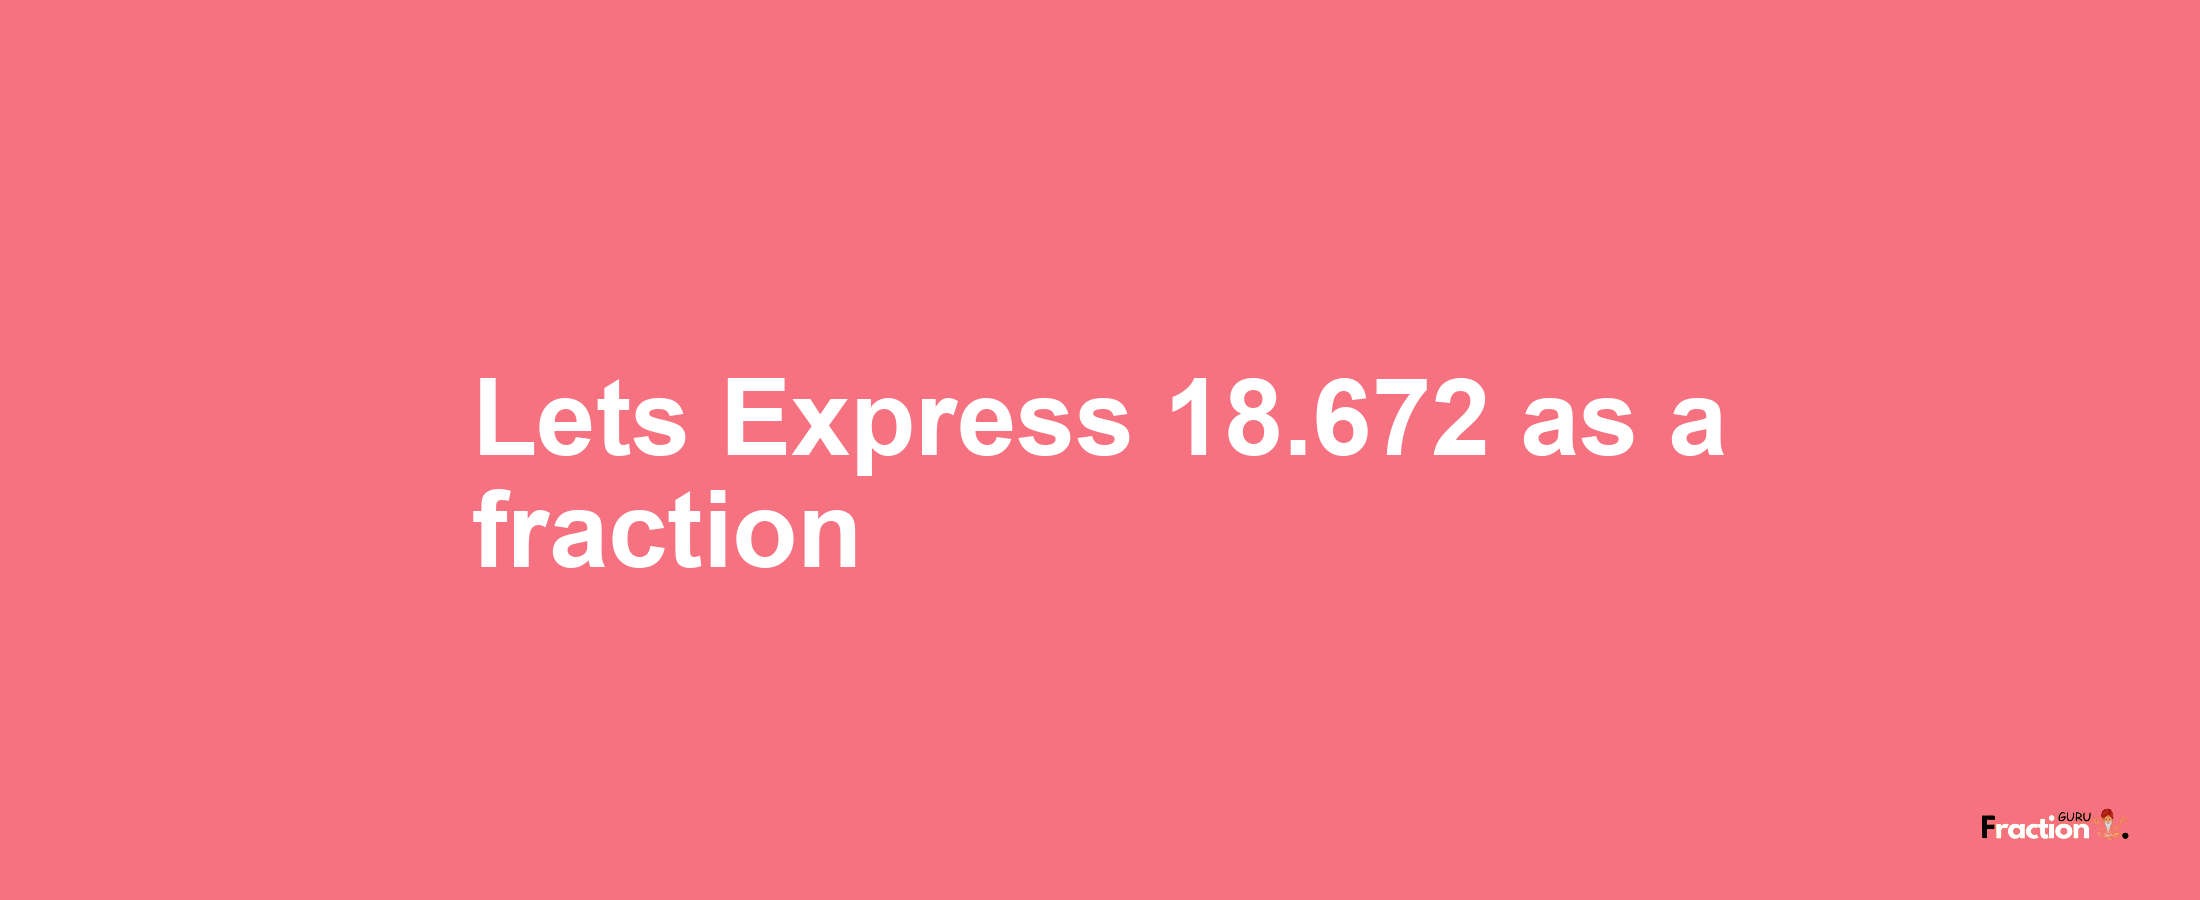 Lets Express 18.672 as afraction